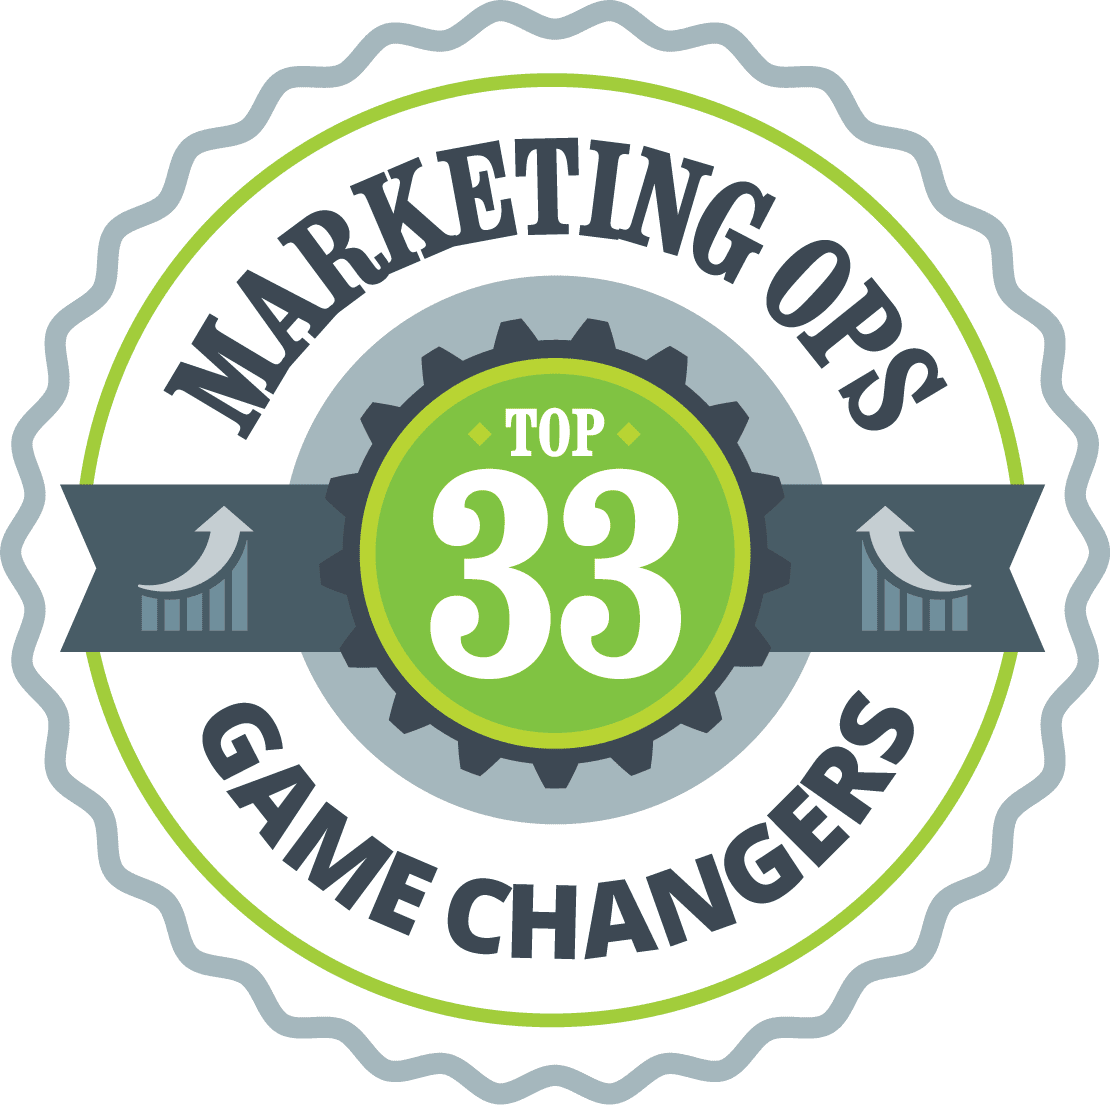 Know a marketing operations game changer?  Nominate them here